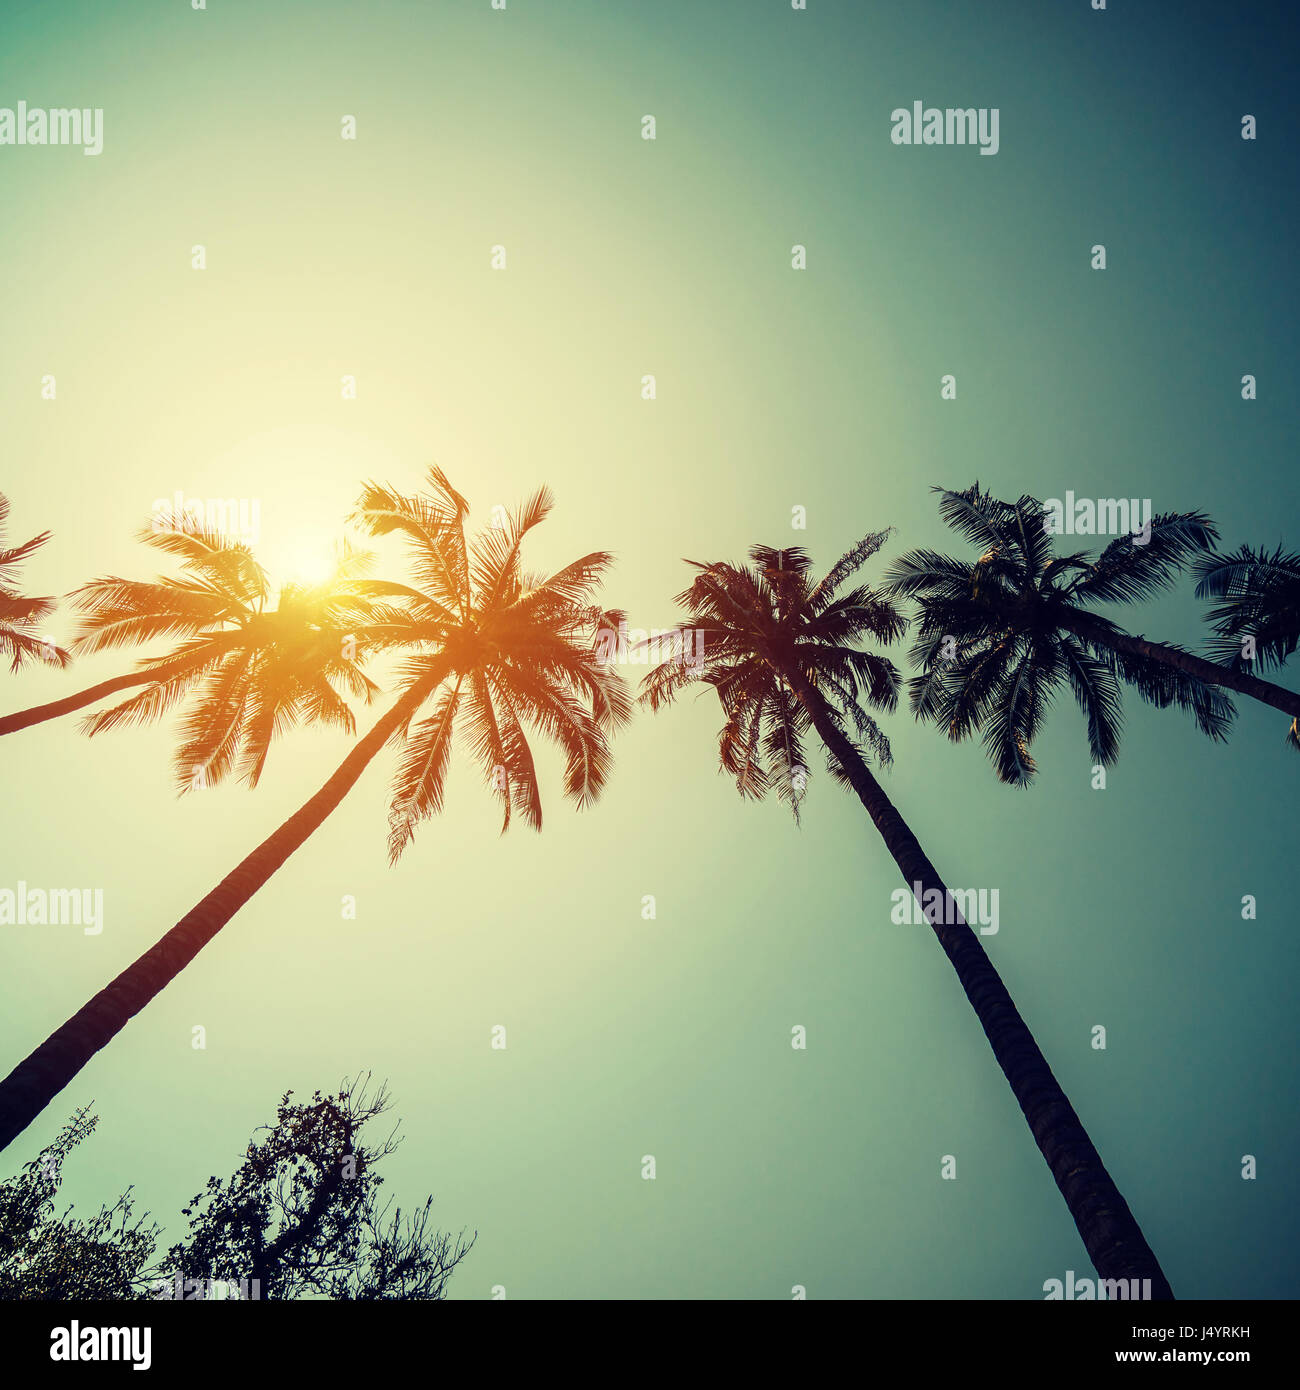 Coconut palm trees at tropical coast with vintage toned and film style. Stock Photo